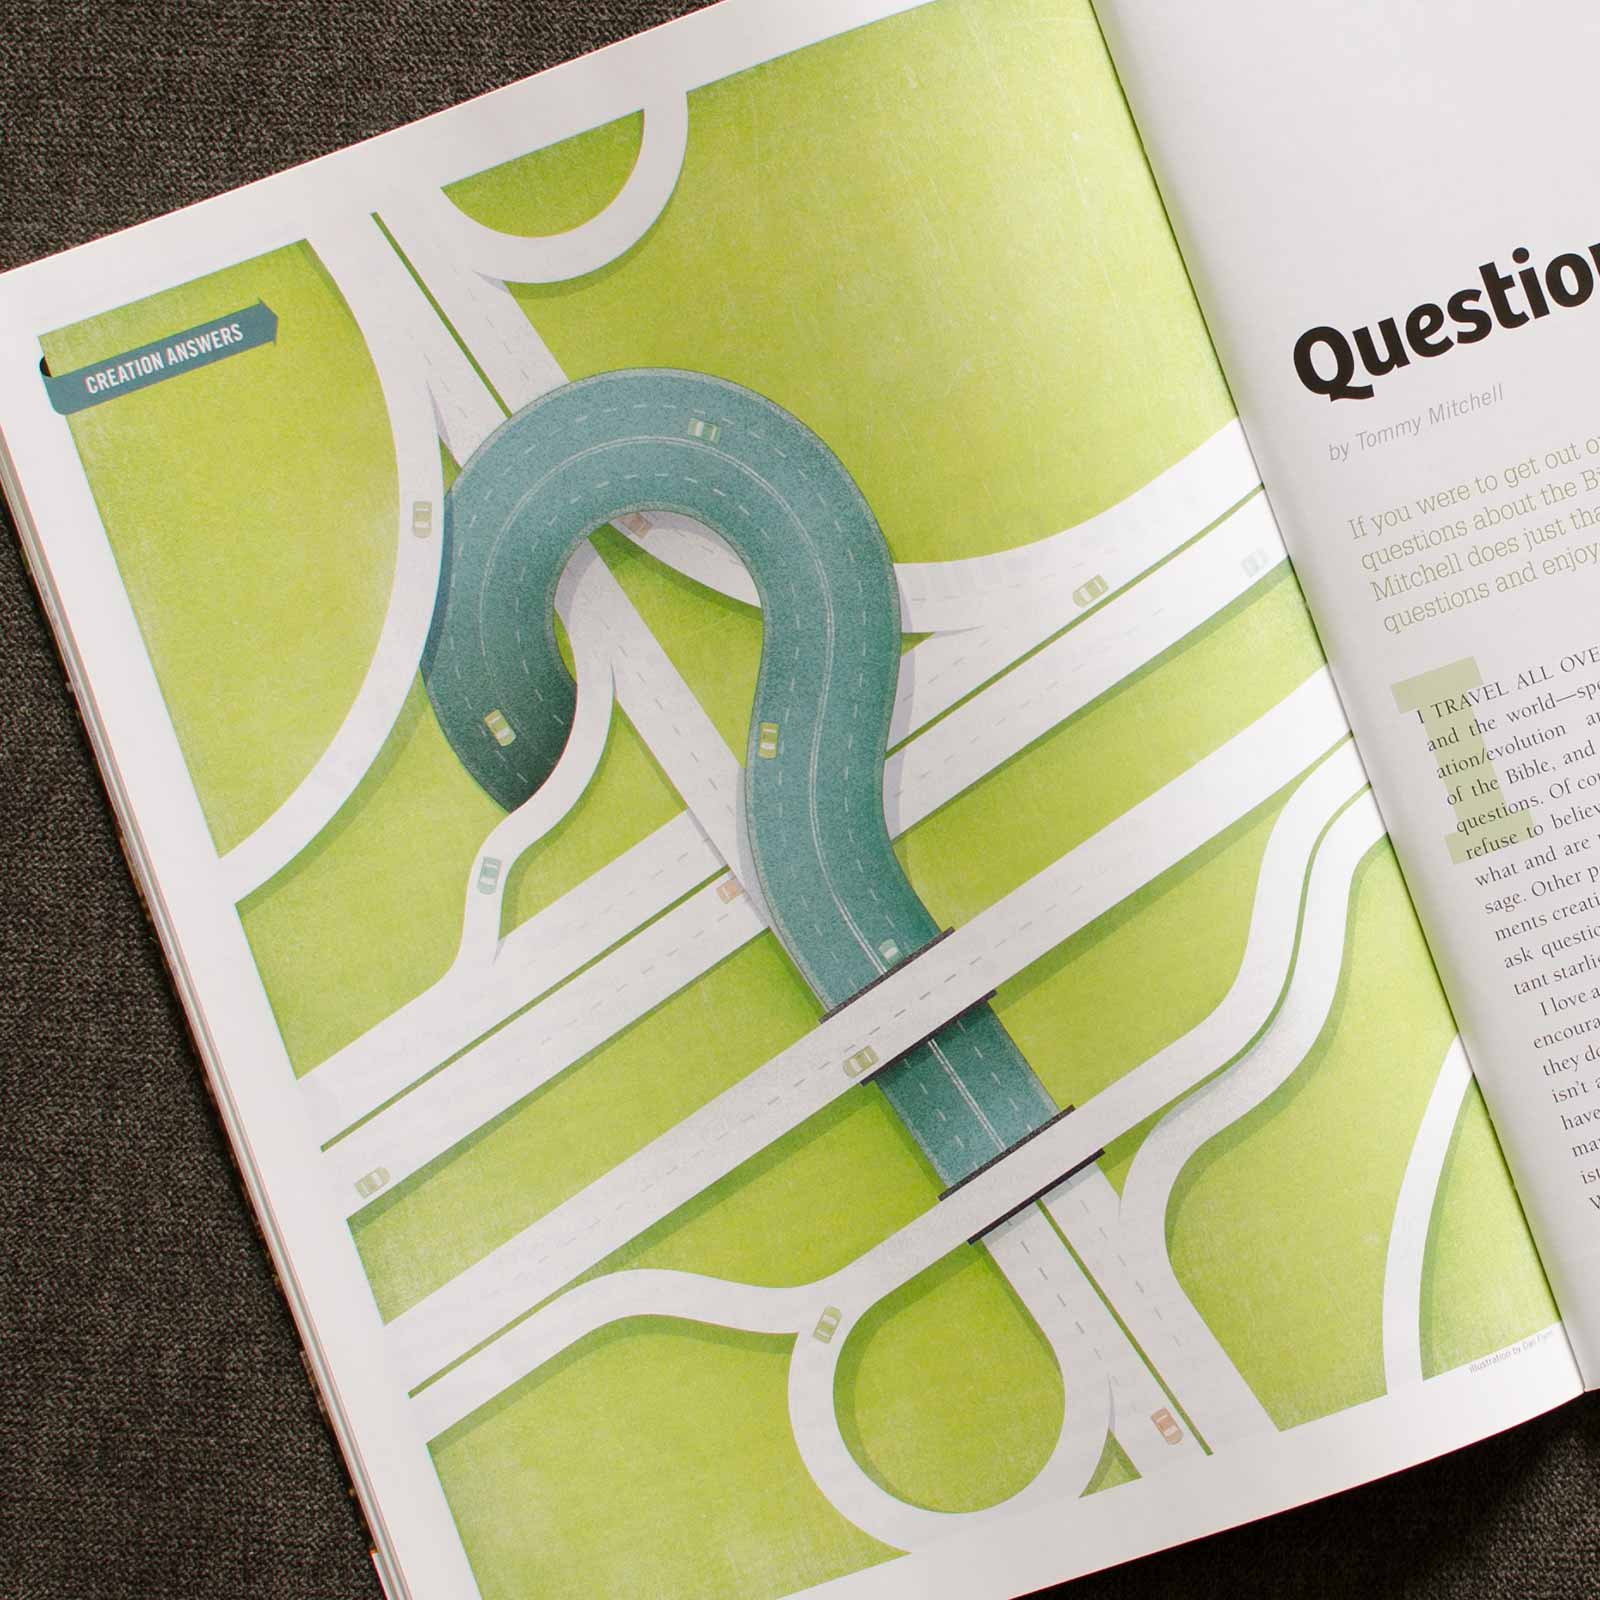 Questions From The Road Magazine Spread